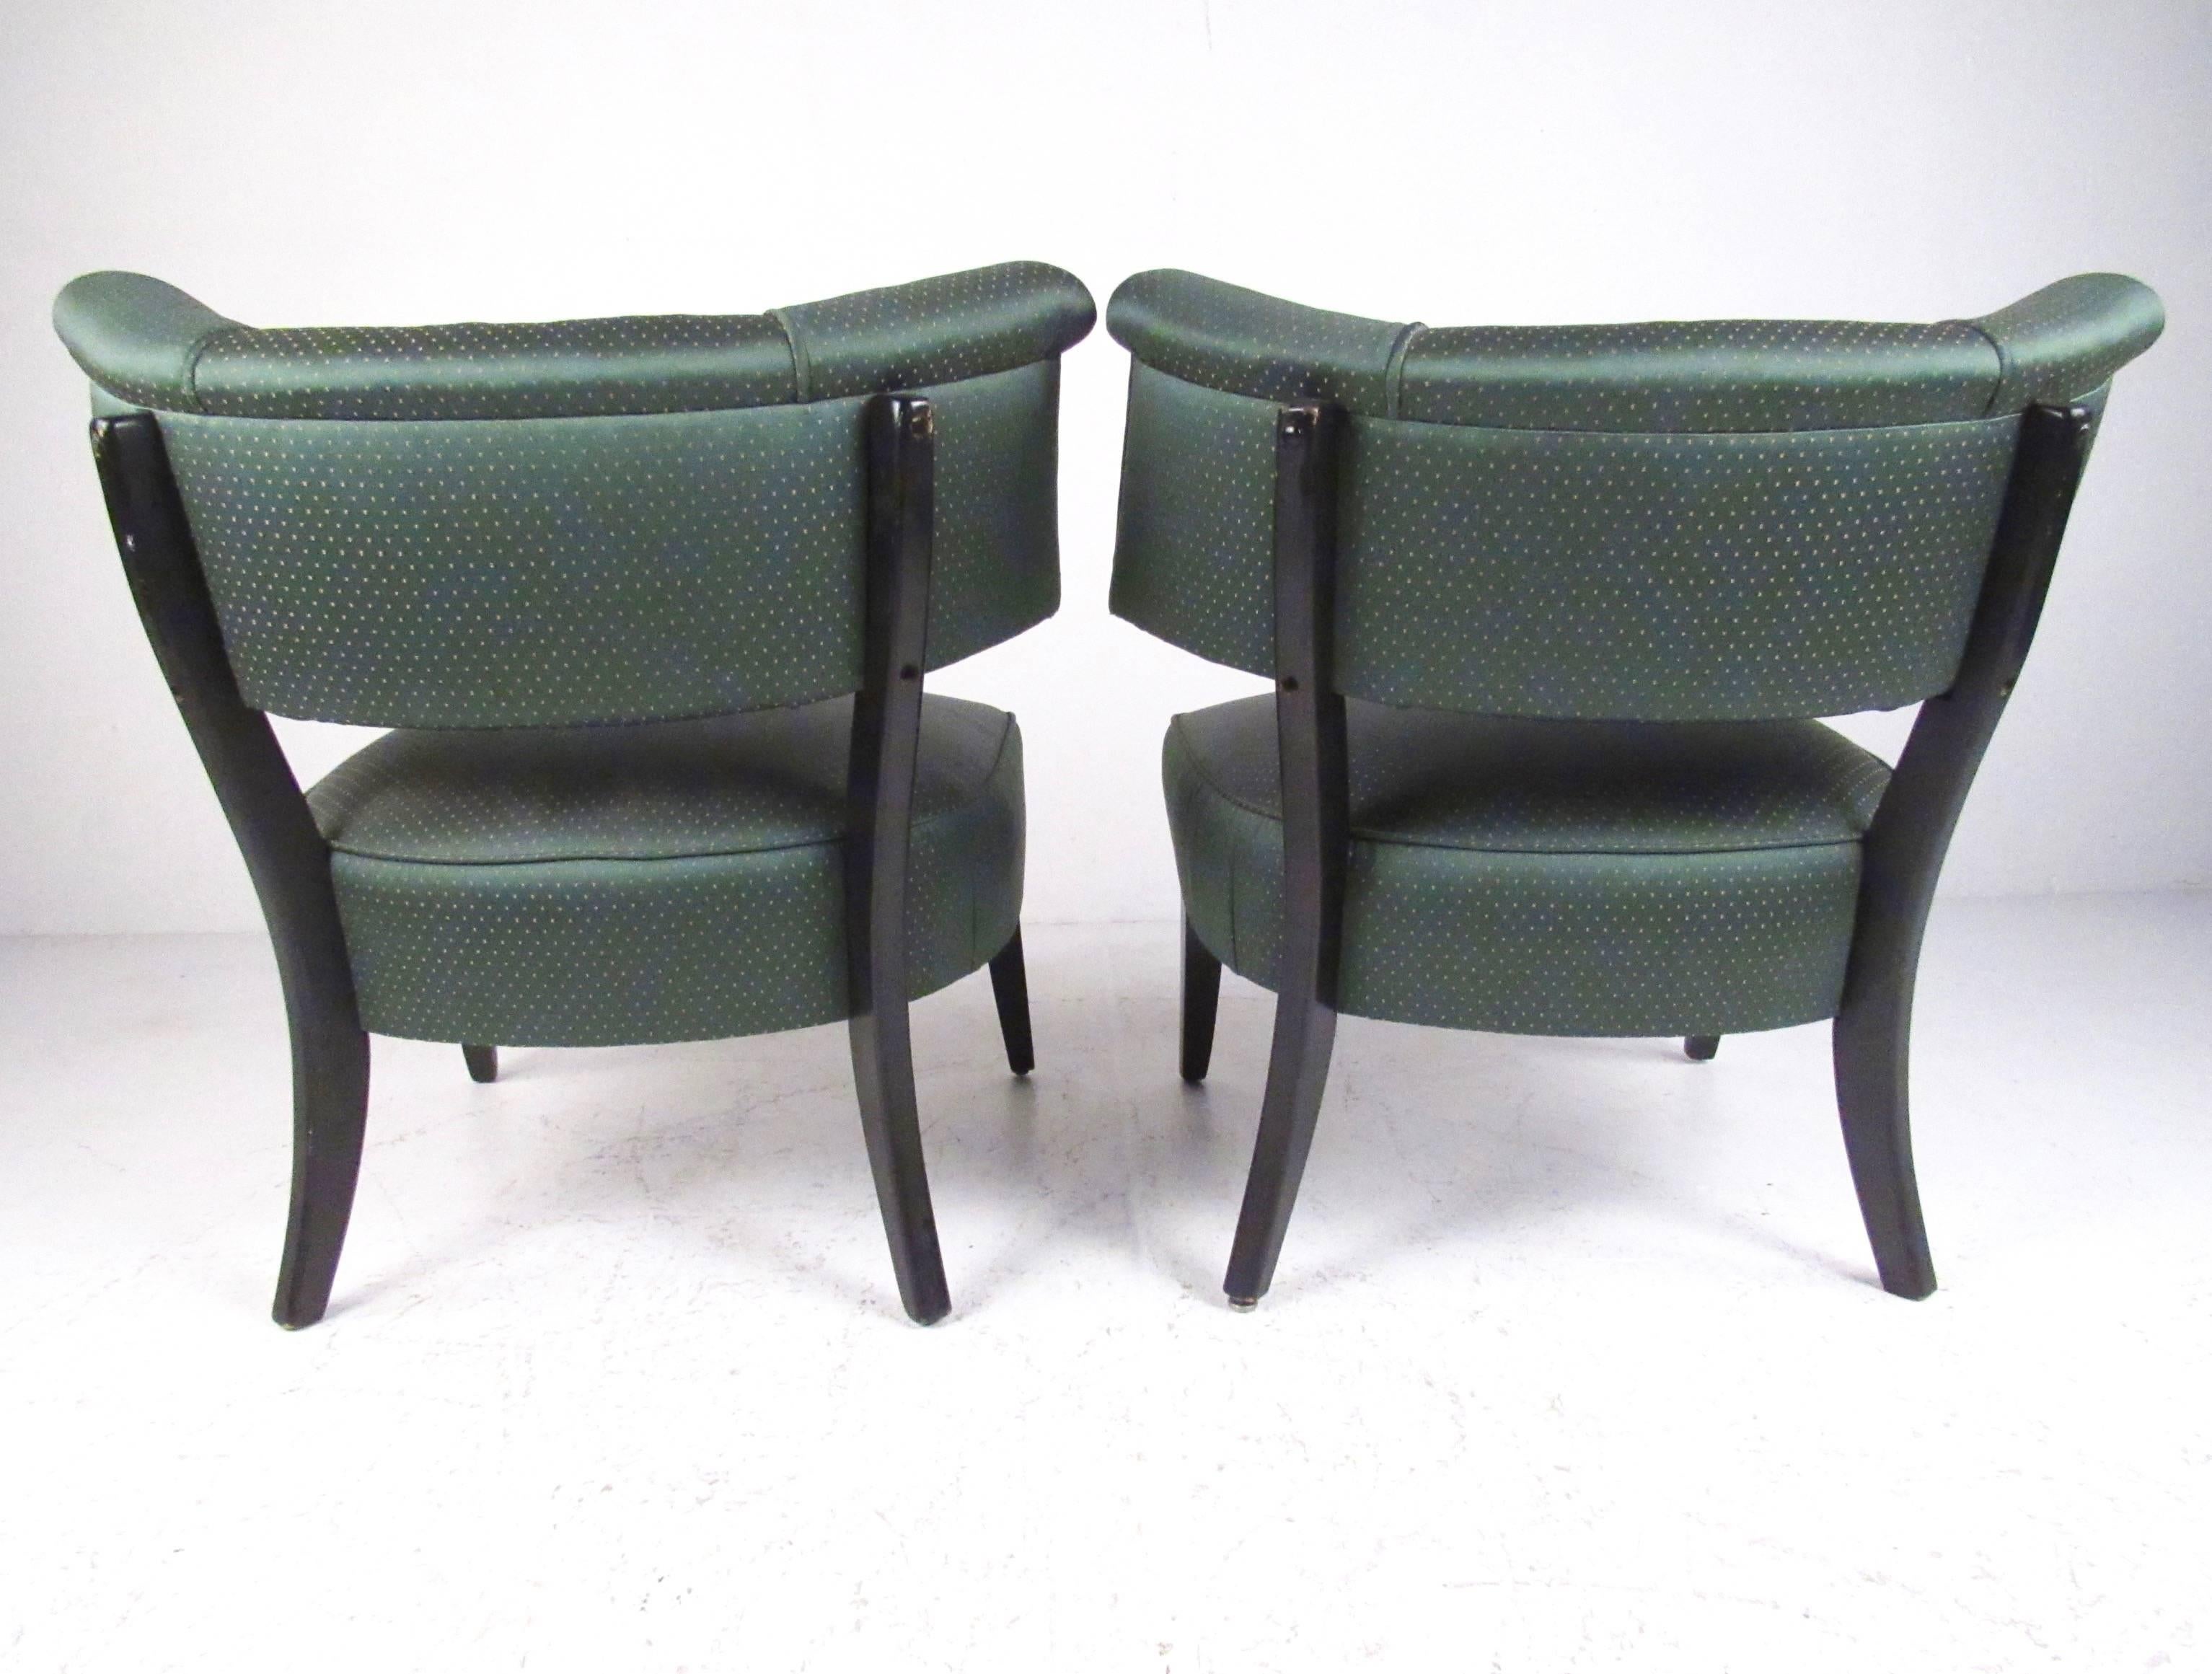 Late 20th Century Stylish Pair of Vintage Art Deco Slipper Chairs